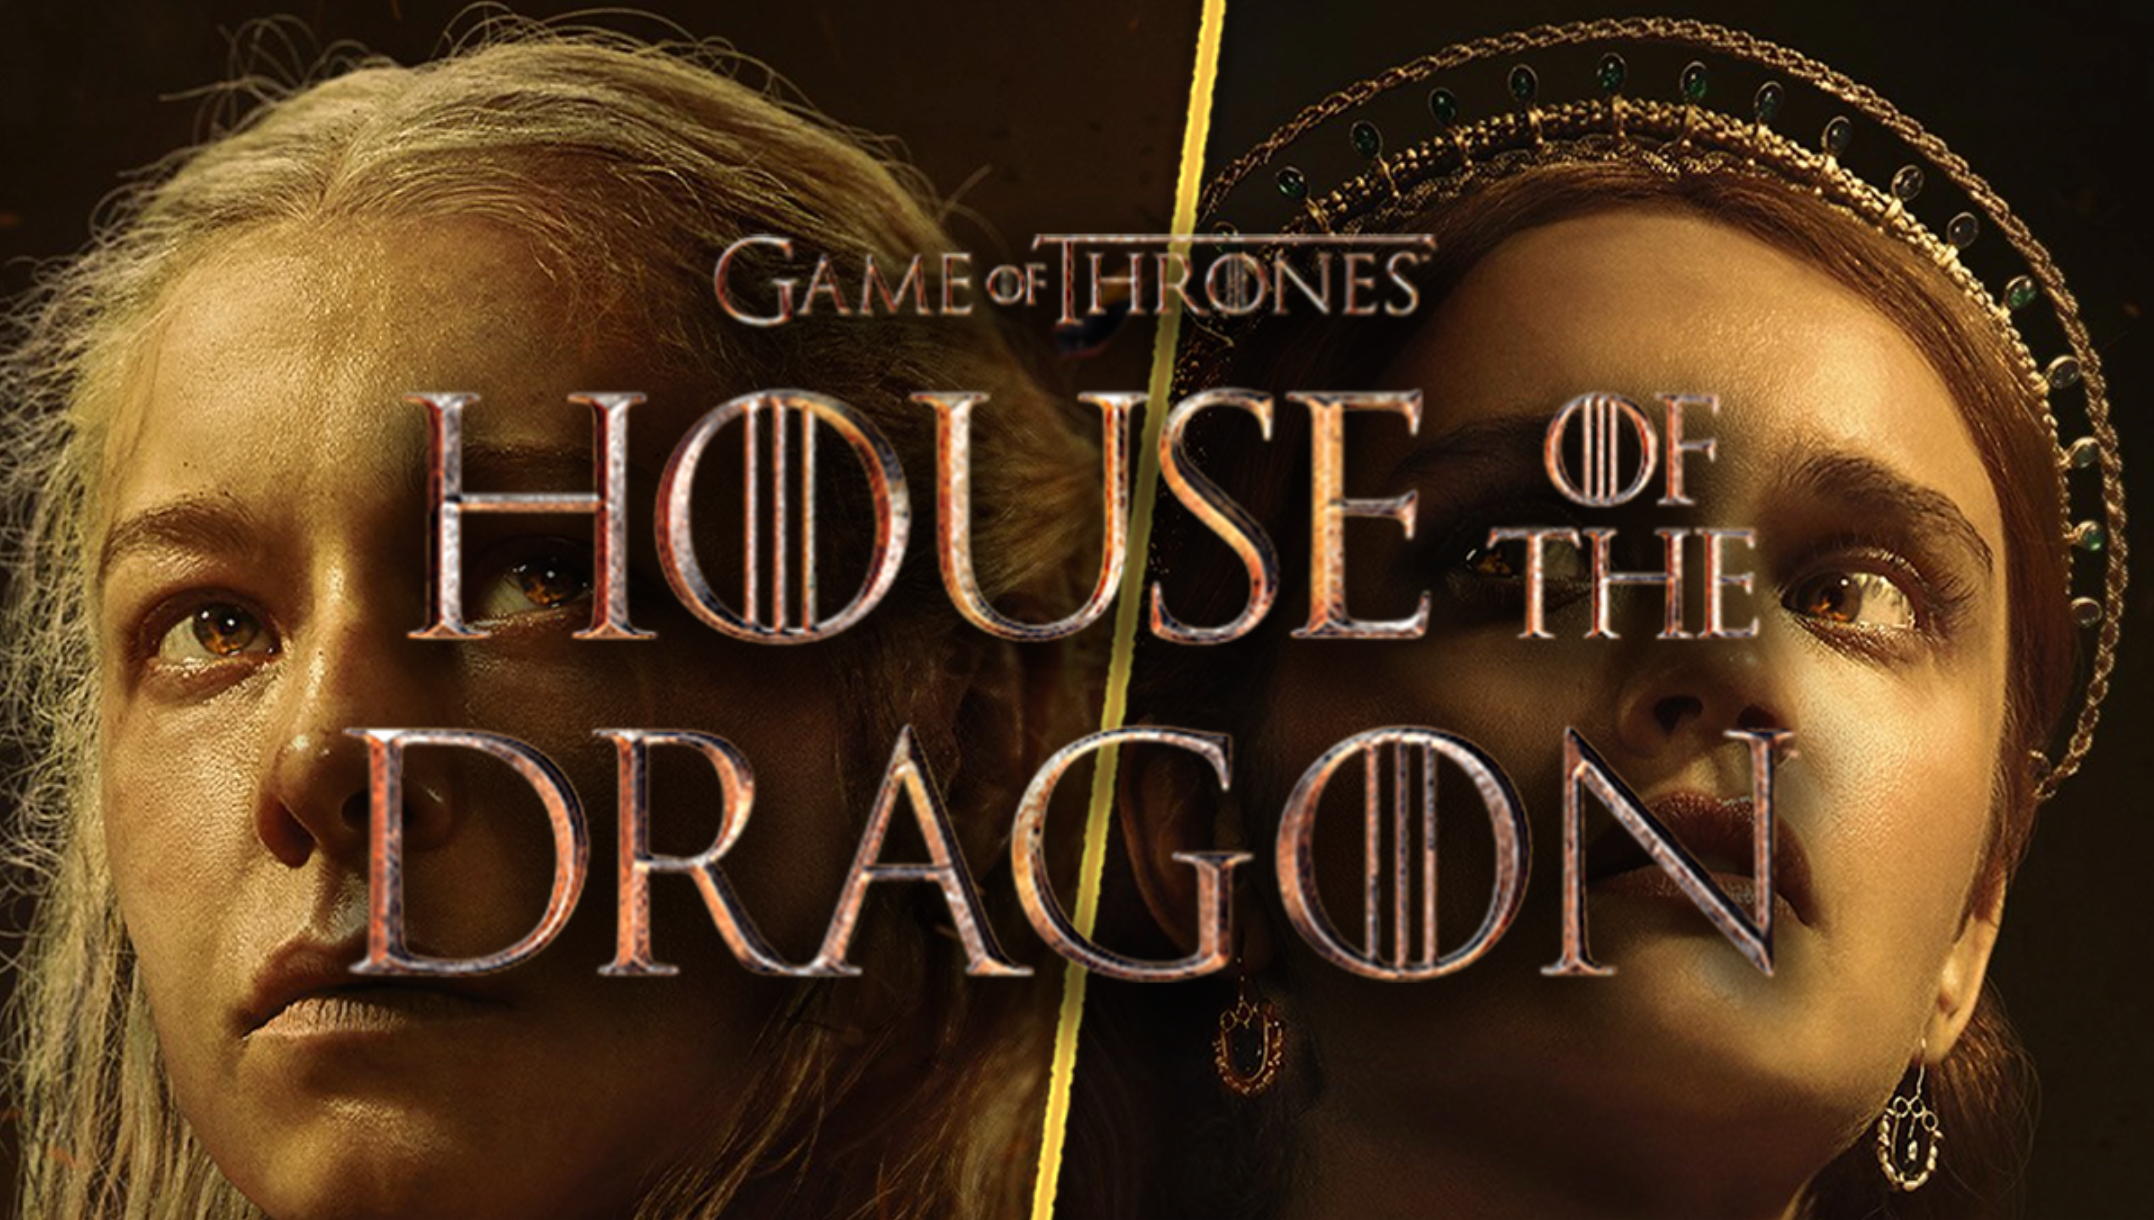 When Does 'House Of The Dragon' Season 2 Come Out?